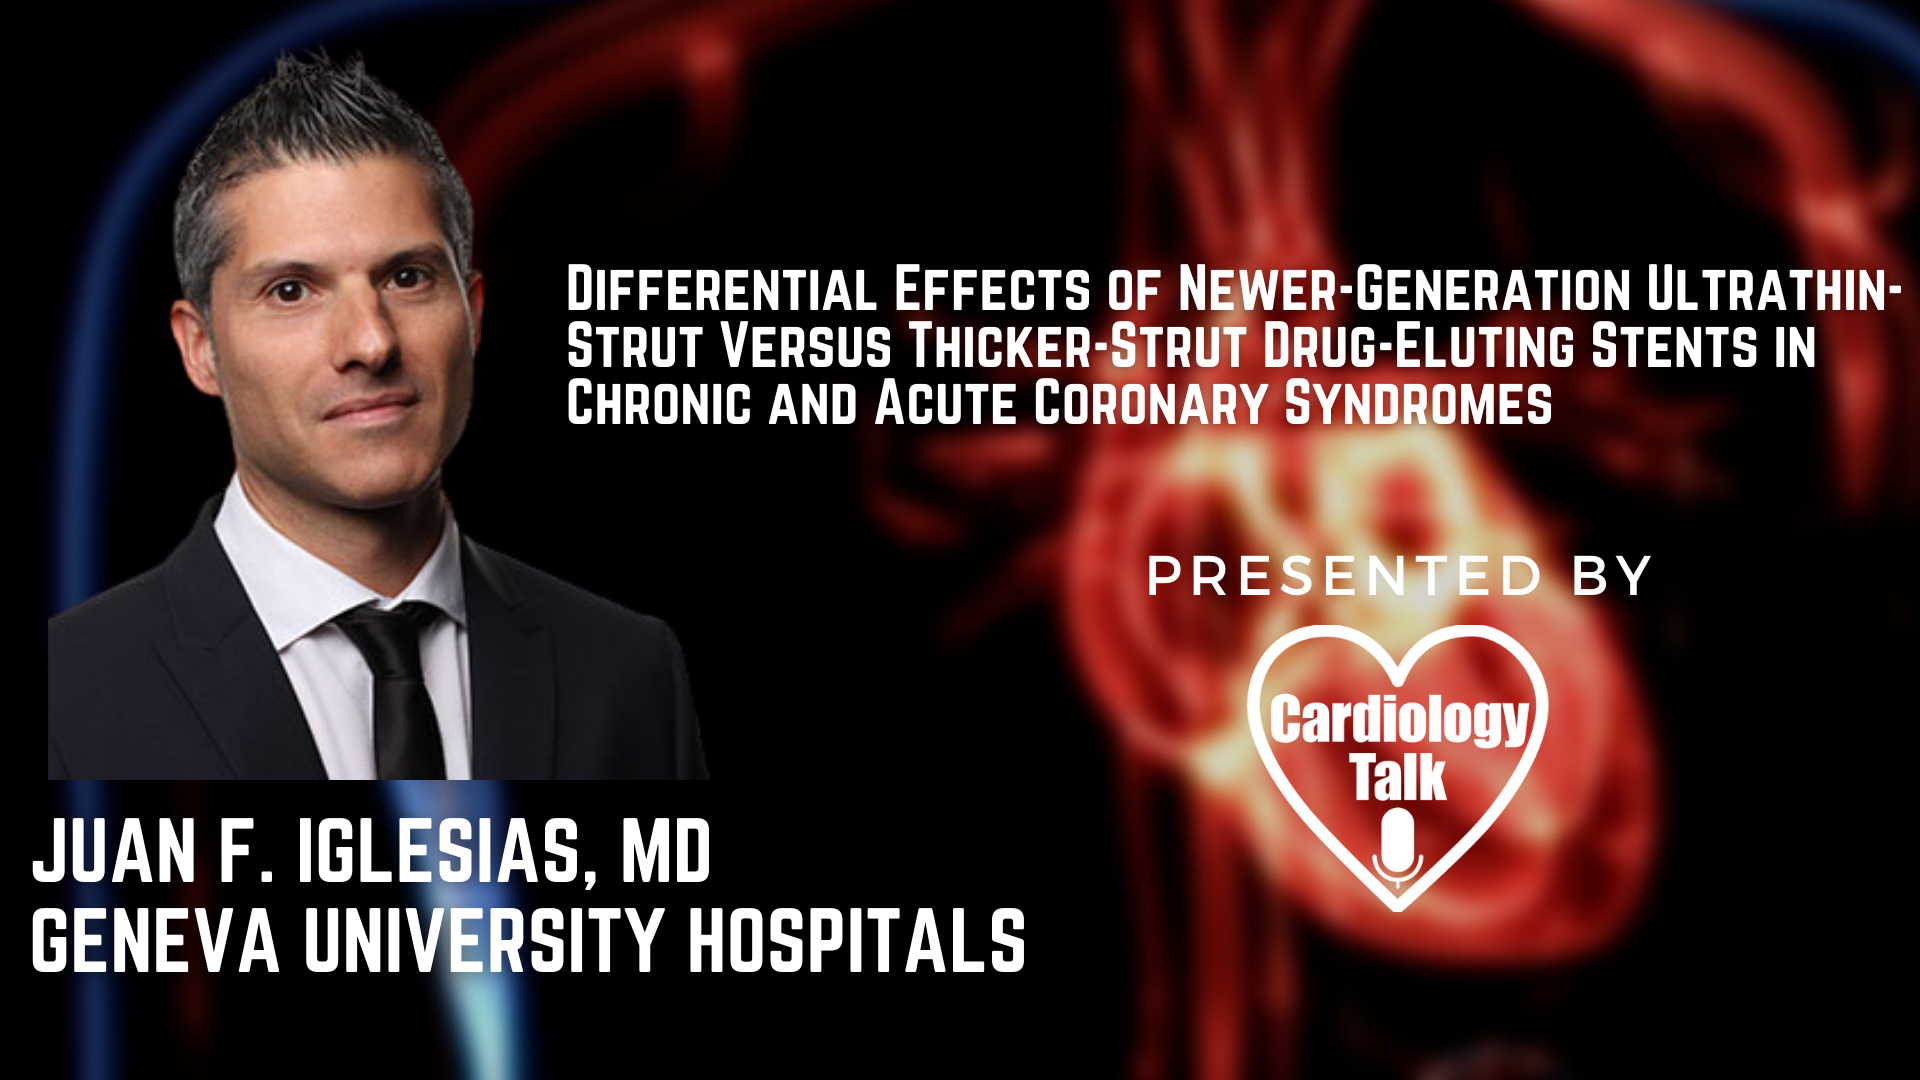 Juan F. Iglesias, MD- Differential Effects of Newer-Generation Ultrathin-Strut Versus Thicker-Strut Drug-Eluting Stents in Chronic and Acute Coronary Syndromes